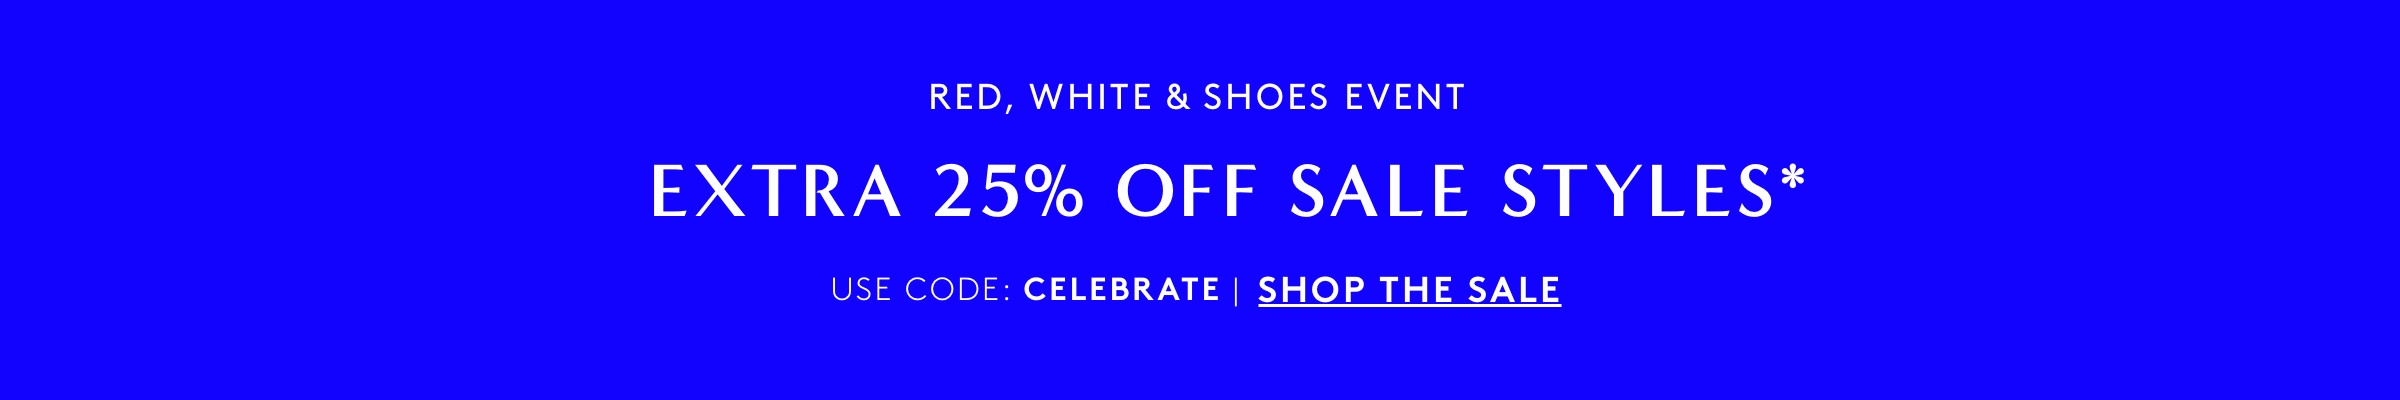 RED, WHITE & SHOES EVENT - EXTRA 25% OFF SALE STYLES. USE CODE: CELEBRATE